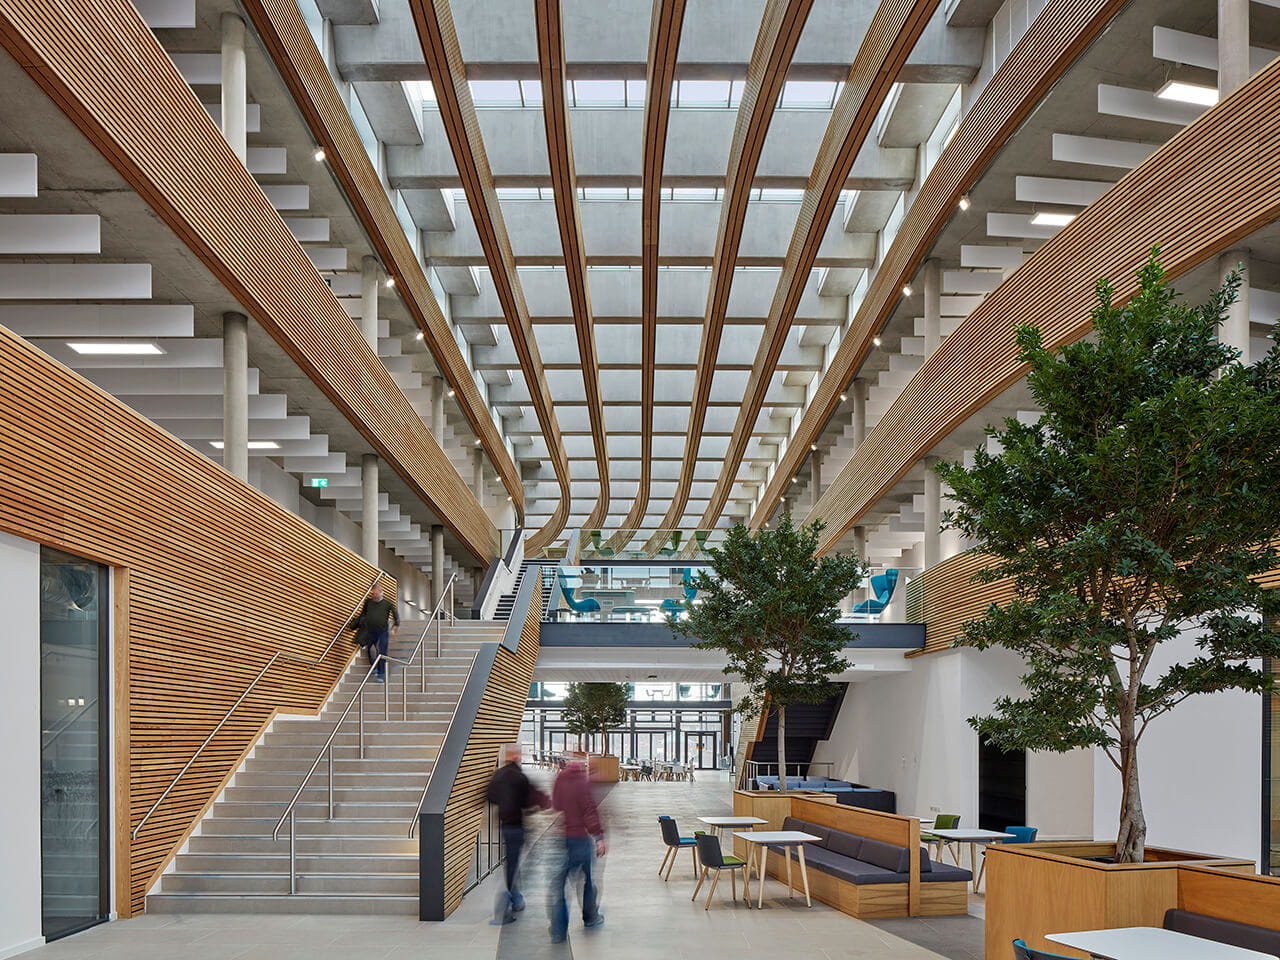 Atrium skylights in the UK Hydrographic Office. AHR Architects